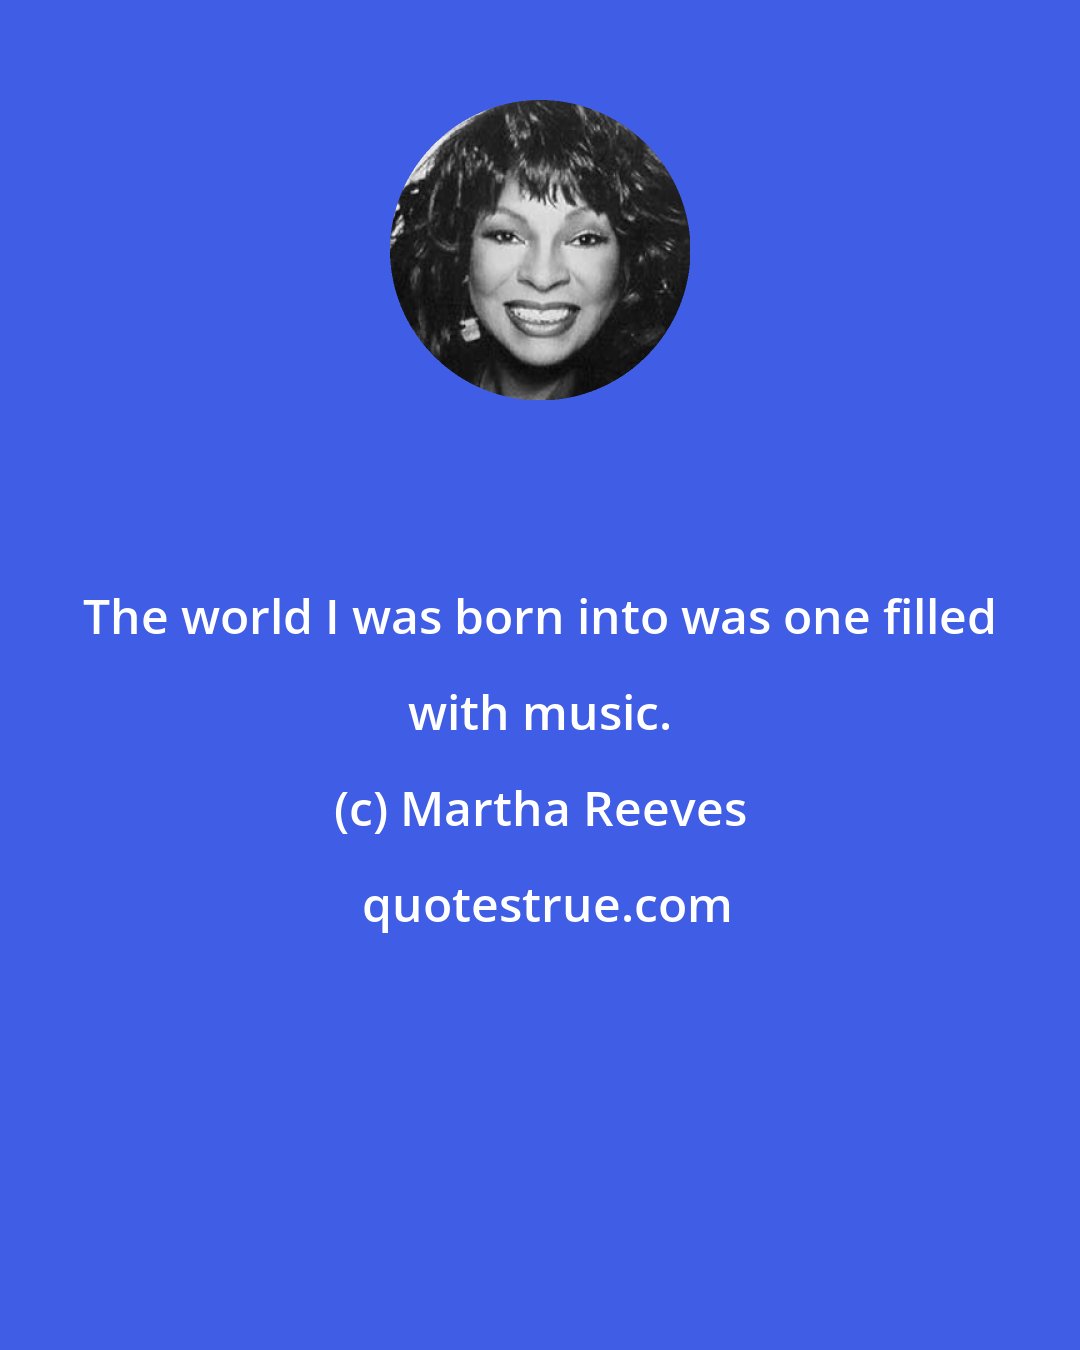 Martha Reeves: The world I was born into was one filled with music.